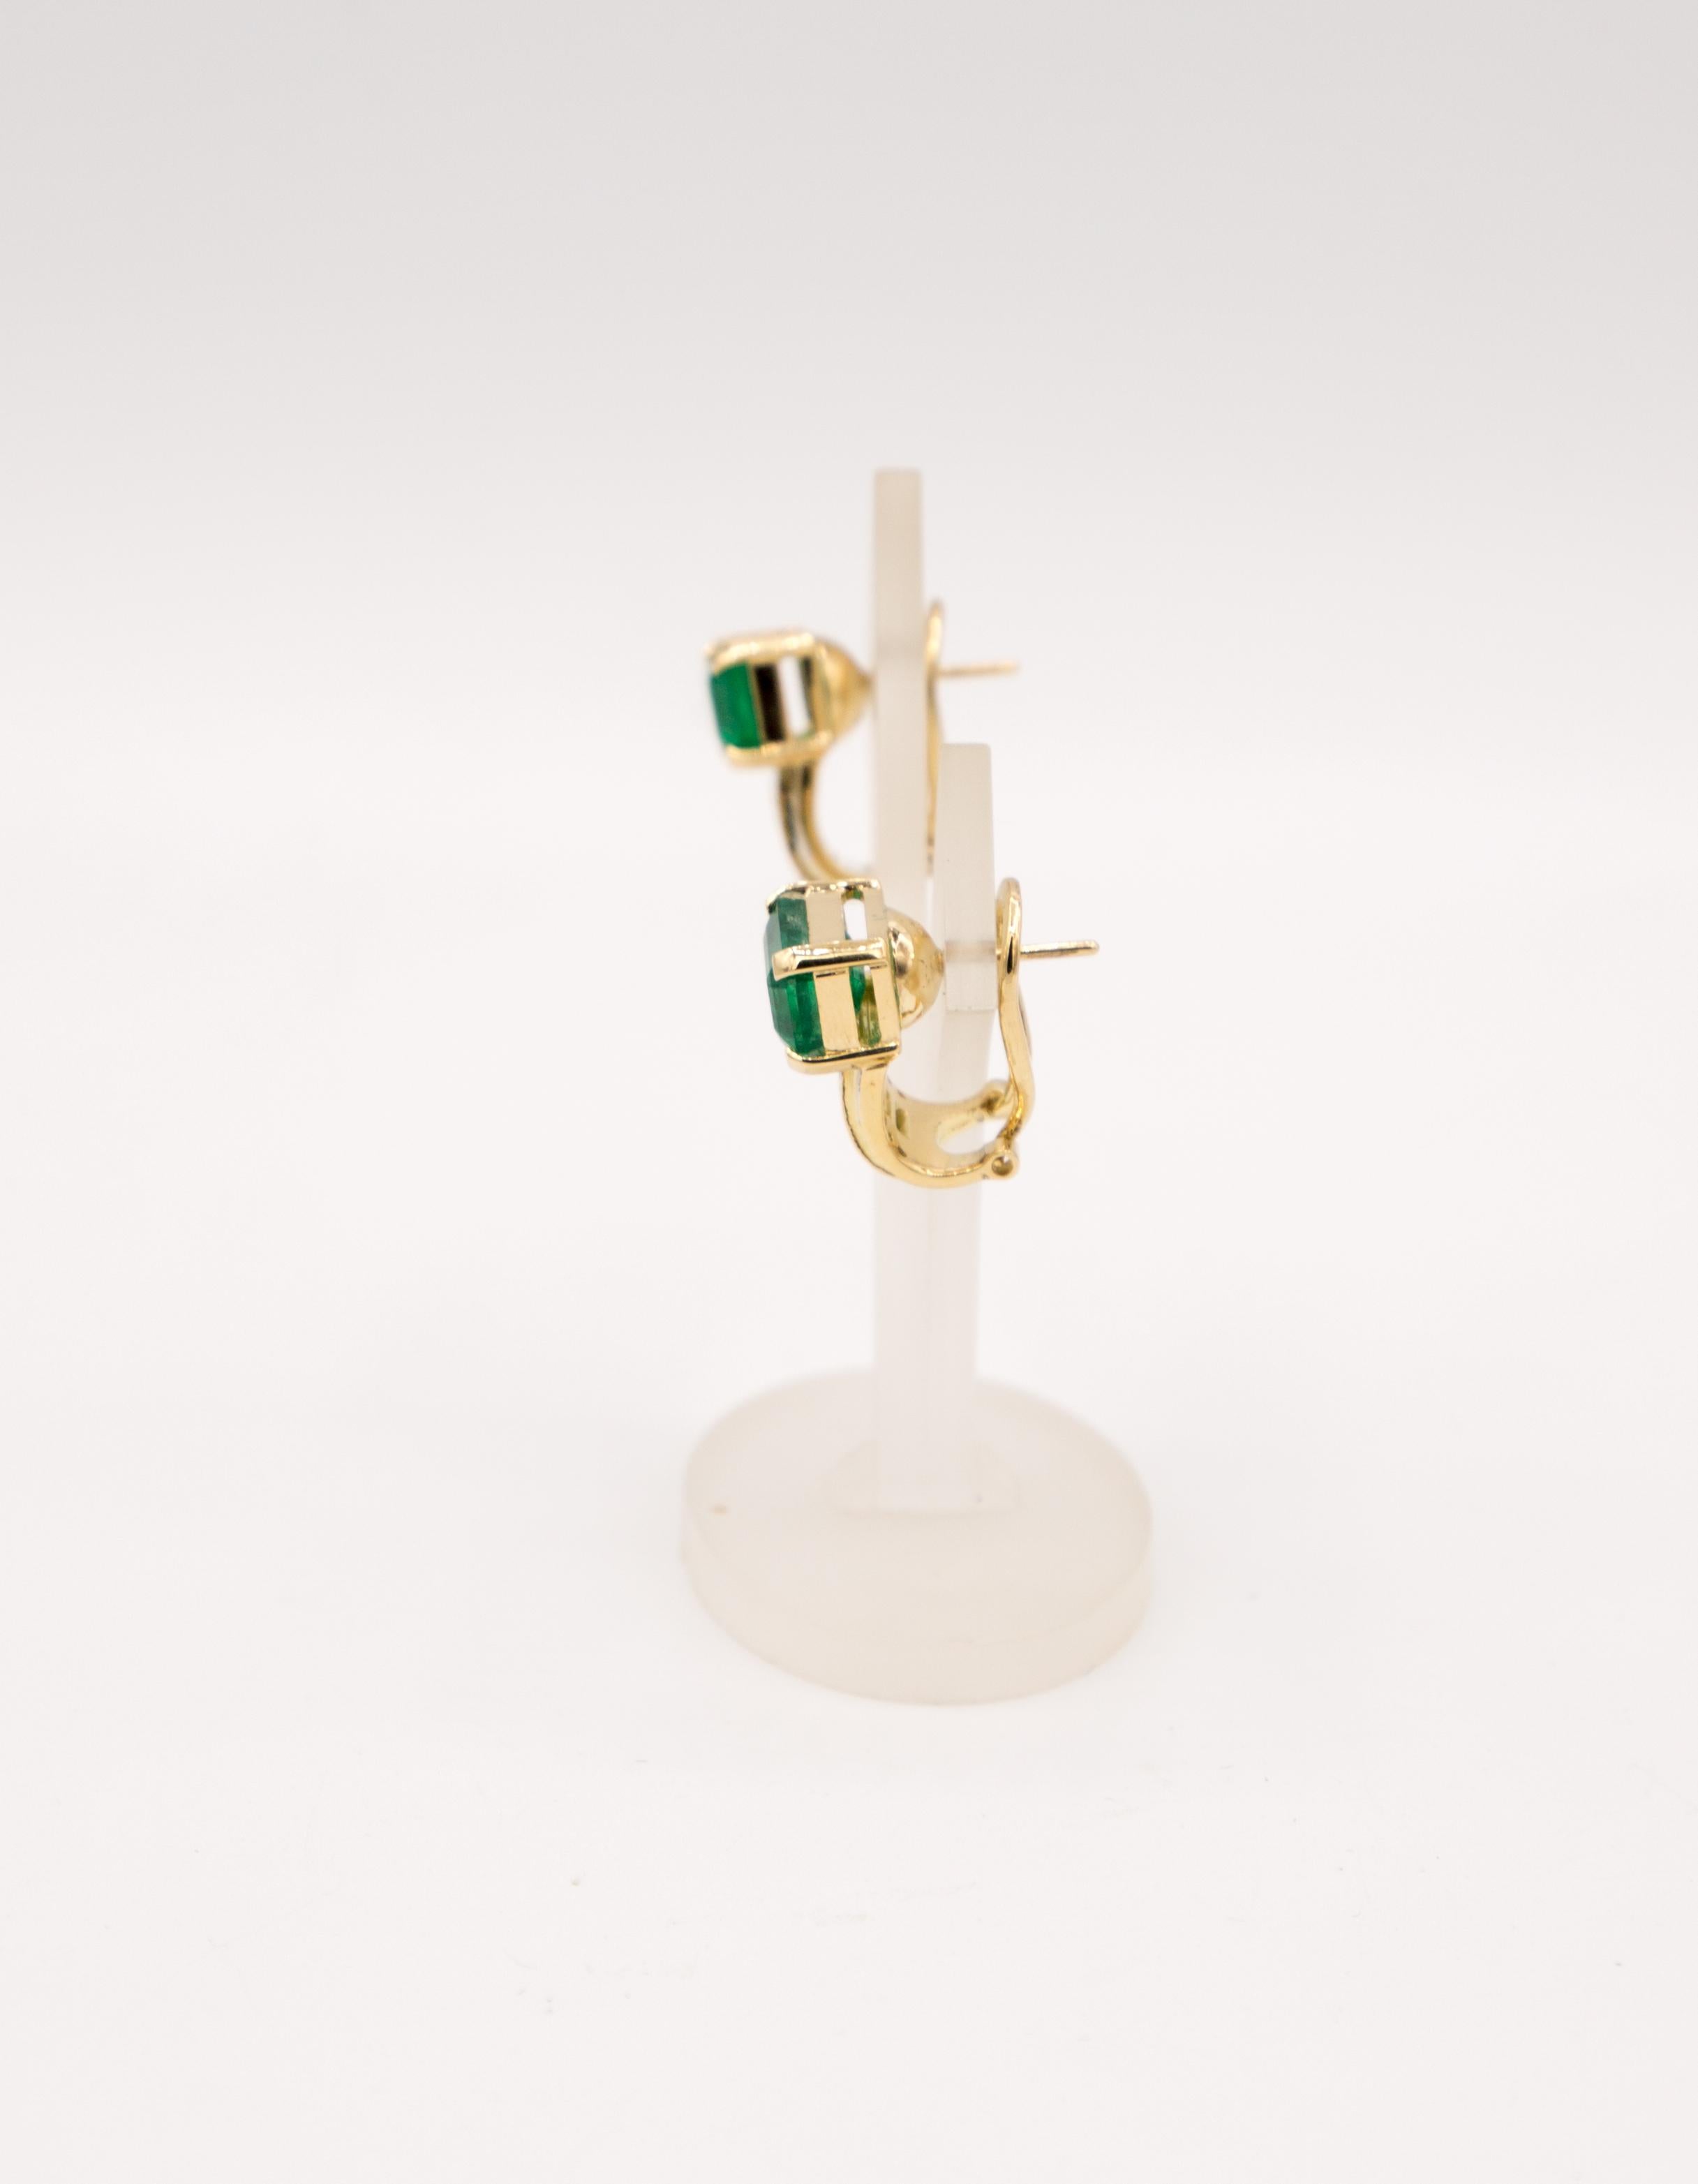 18 k yellow gold
6,78 ct emerald
1,24 ct emerald
0,27 ct diamond
12,4 gram
20 x 10 mm
this earring has a pen and clip, if you not want the pen,
we can make it away.
beautiful color of the emerald